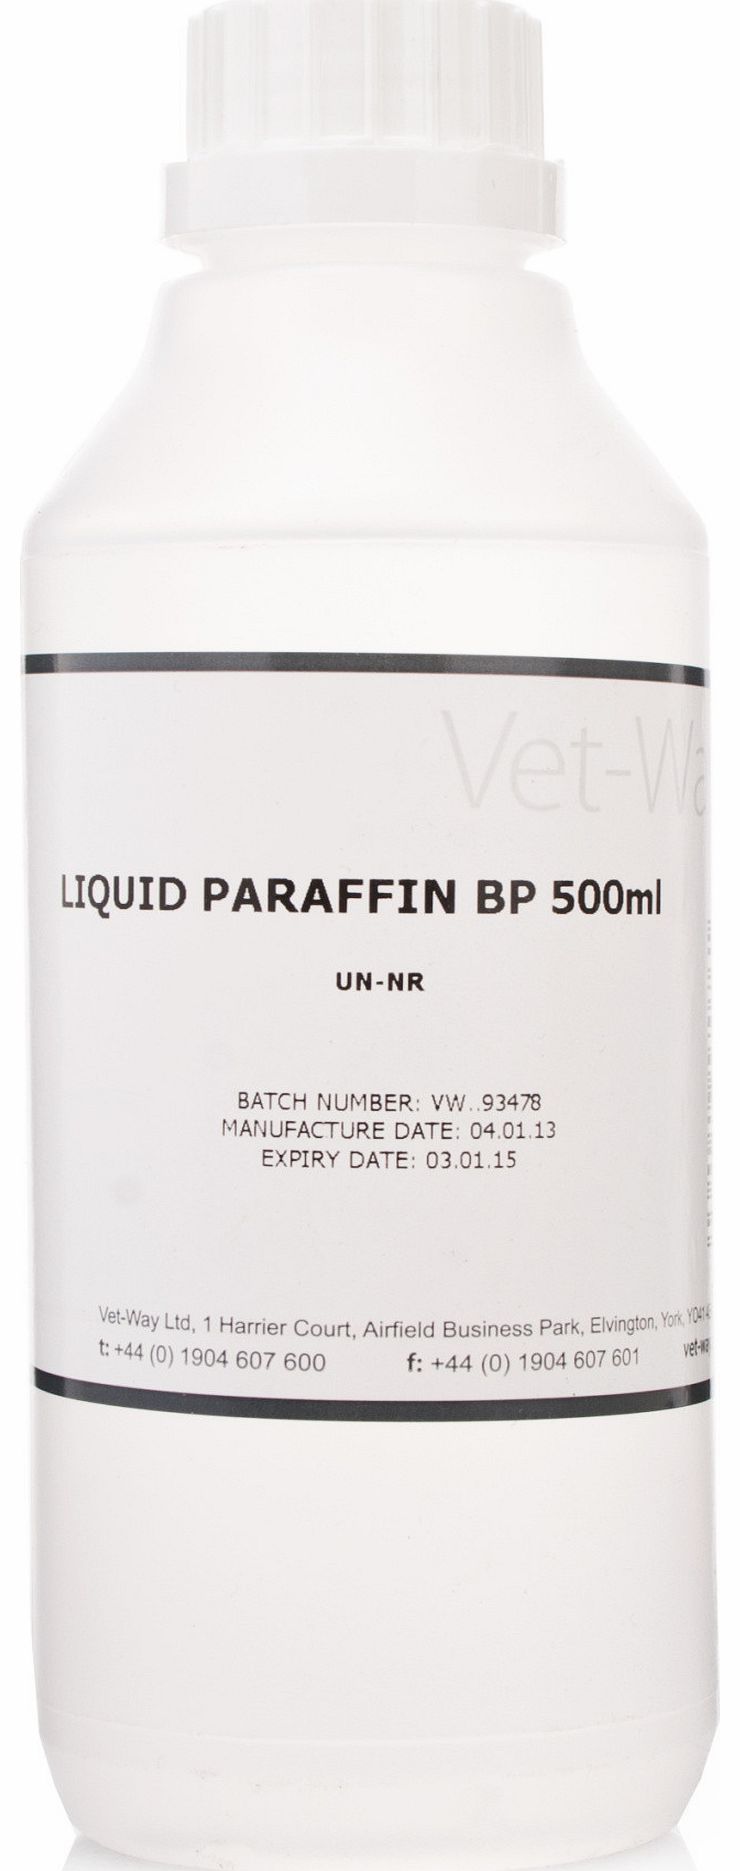 Liquid Paraffin is formulated specifically for animals such as cattle, cats and dogs and helps to treat and relieve cases of constipation, which can often leave them stressed and uncomfortable. This liquid solution works by softening and lubricating 